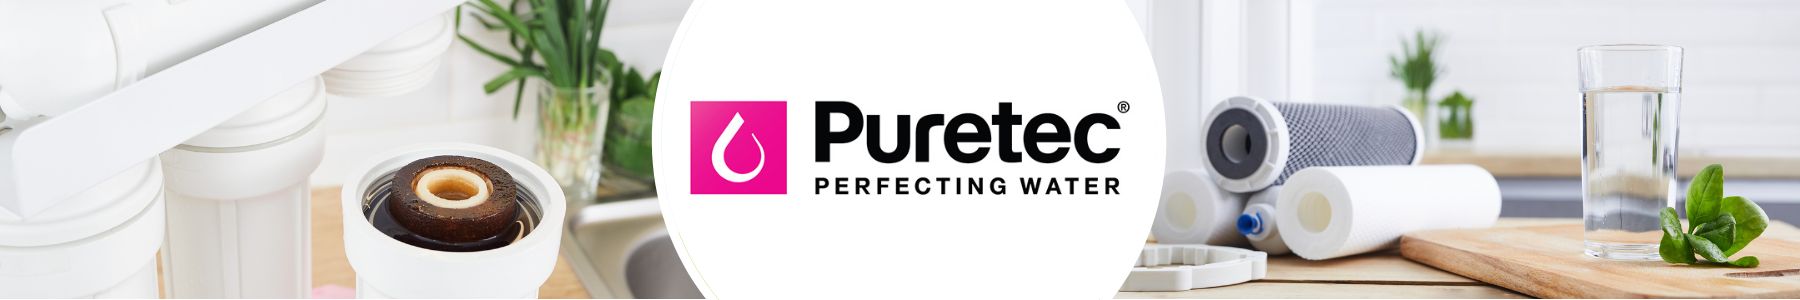 <p>With more than 30 years in the water filtration industry, Puretec remains a family-owned, family-run company with an unrivalled reputation for quality, innovation and reliability. <br>Puretec manufactures innovative solutions to achieve the best possible outcome for all your water filtration needs.</p>